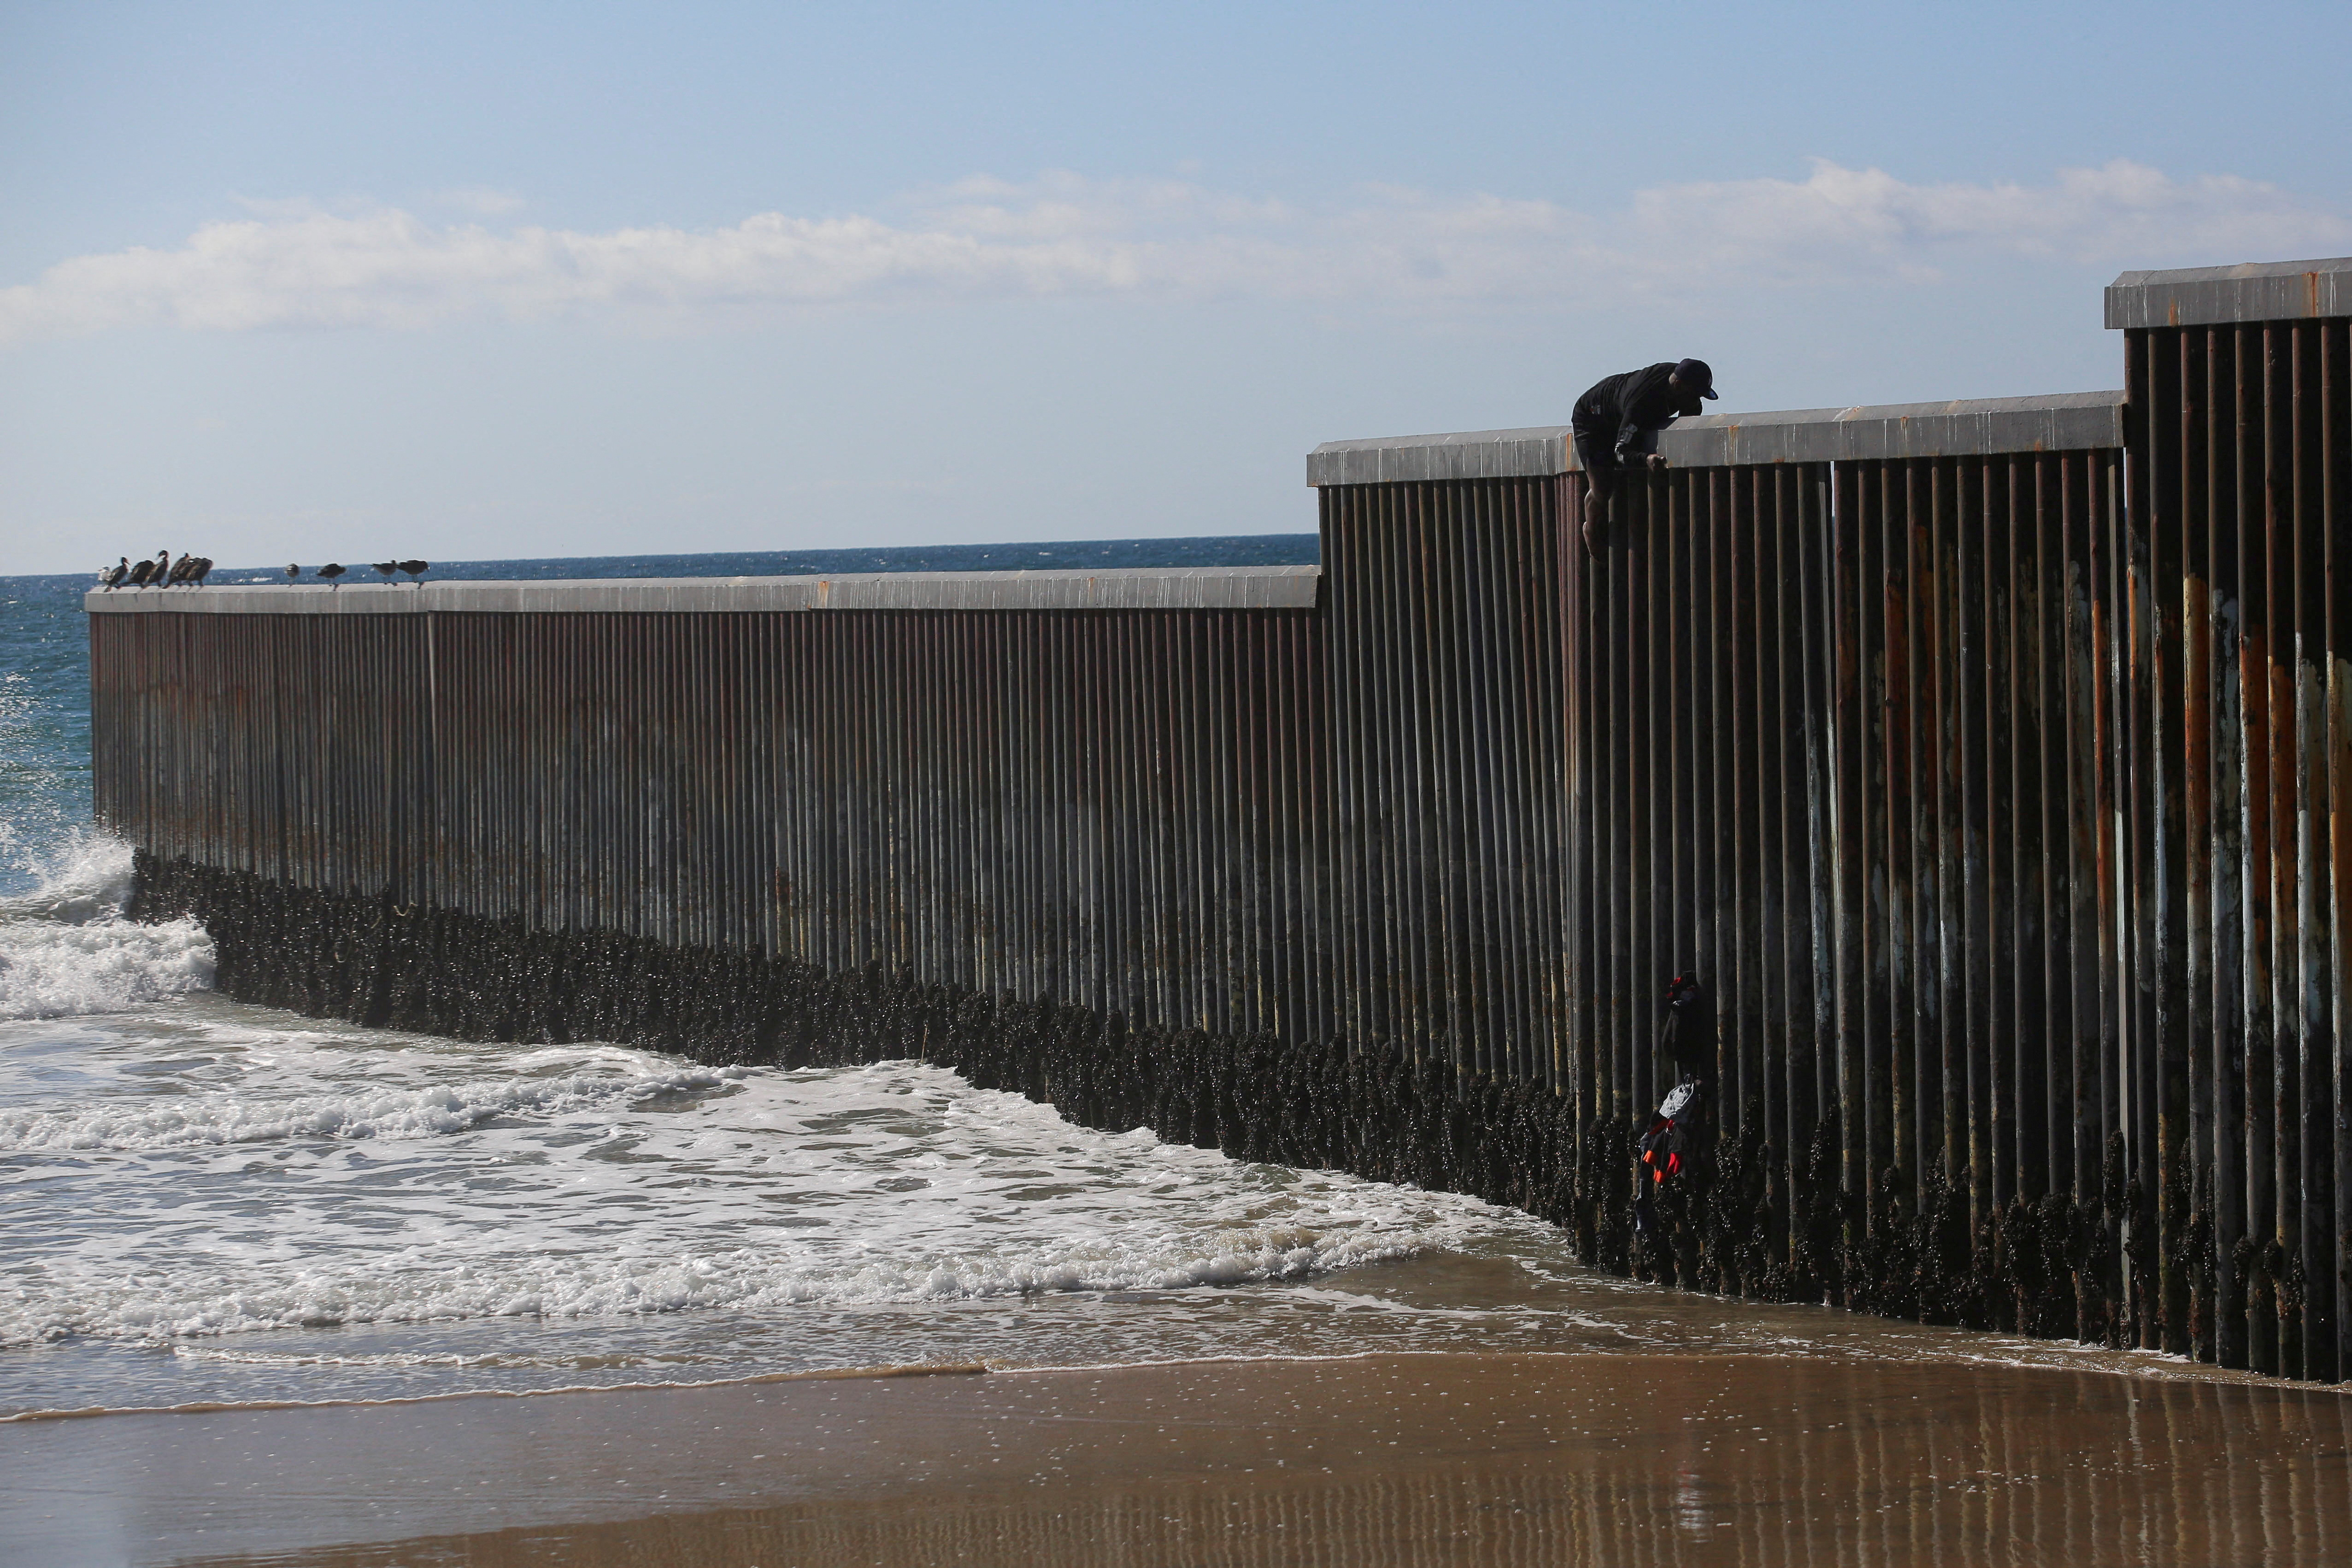 A migrant climbs the border fence to cross into the U.S. to request asylum, in Playas de Tijuana